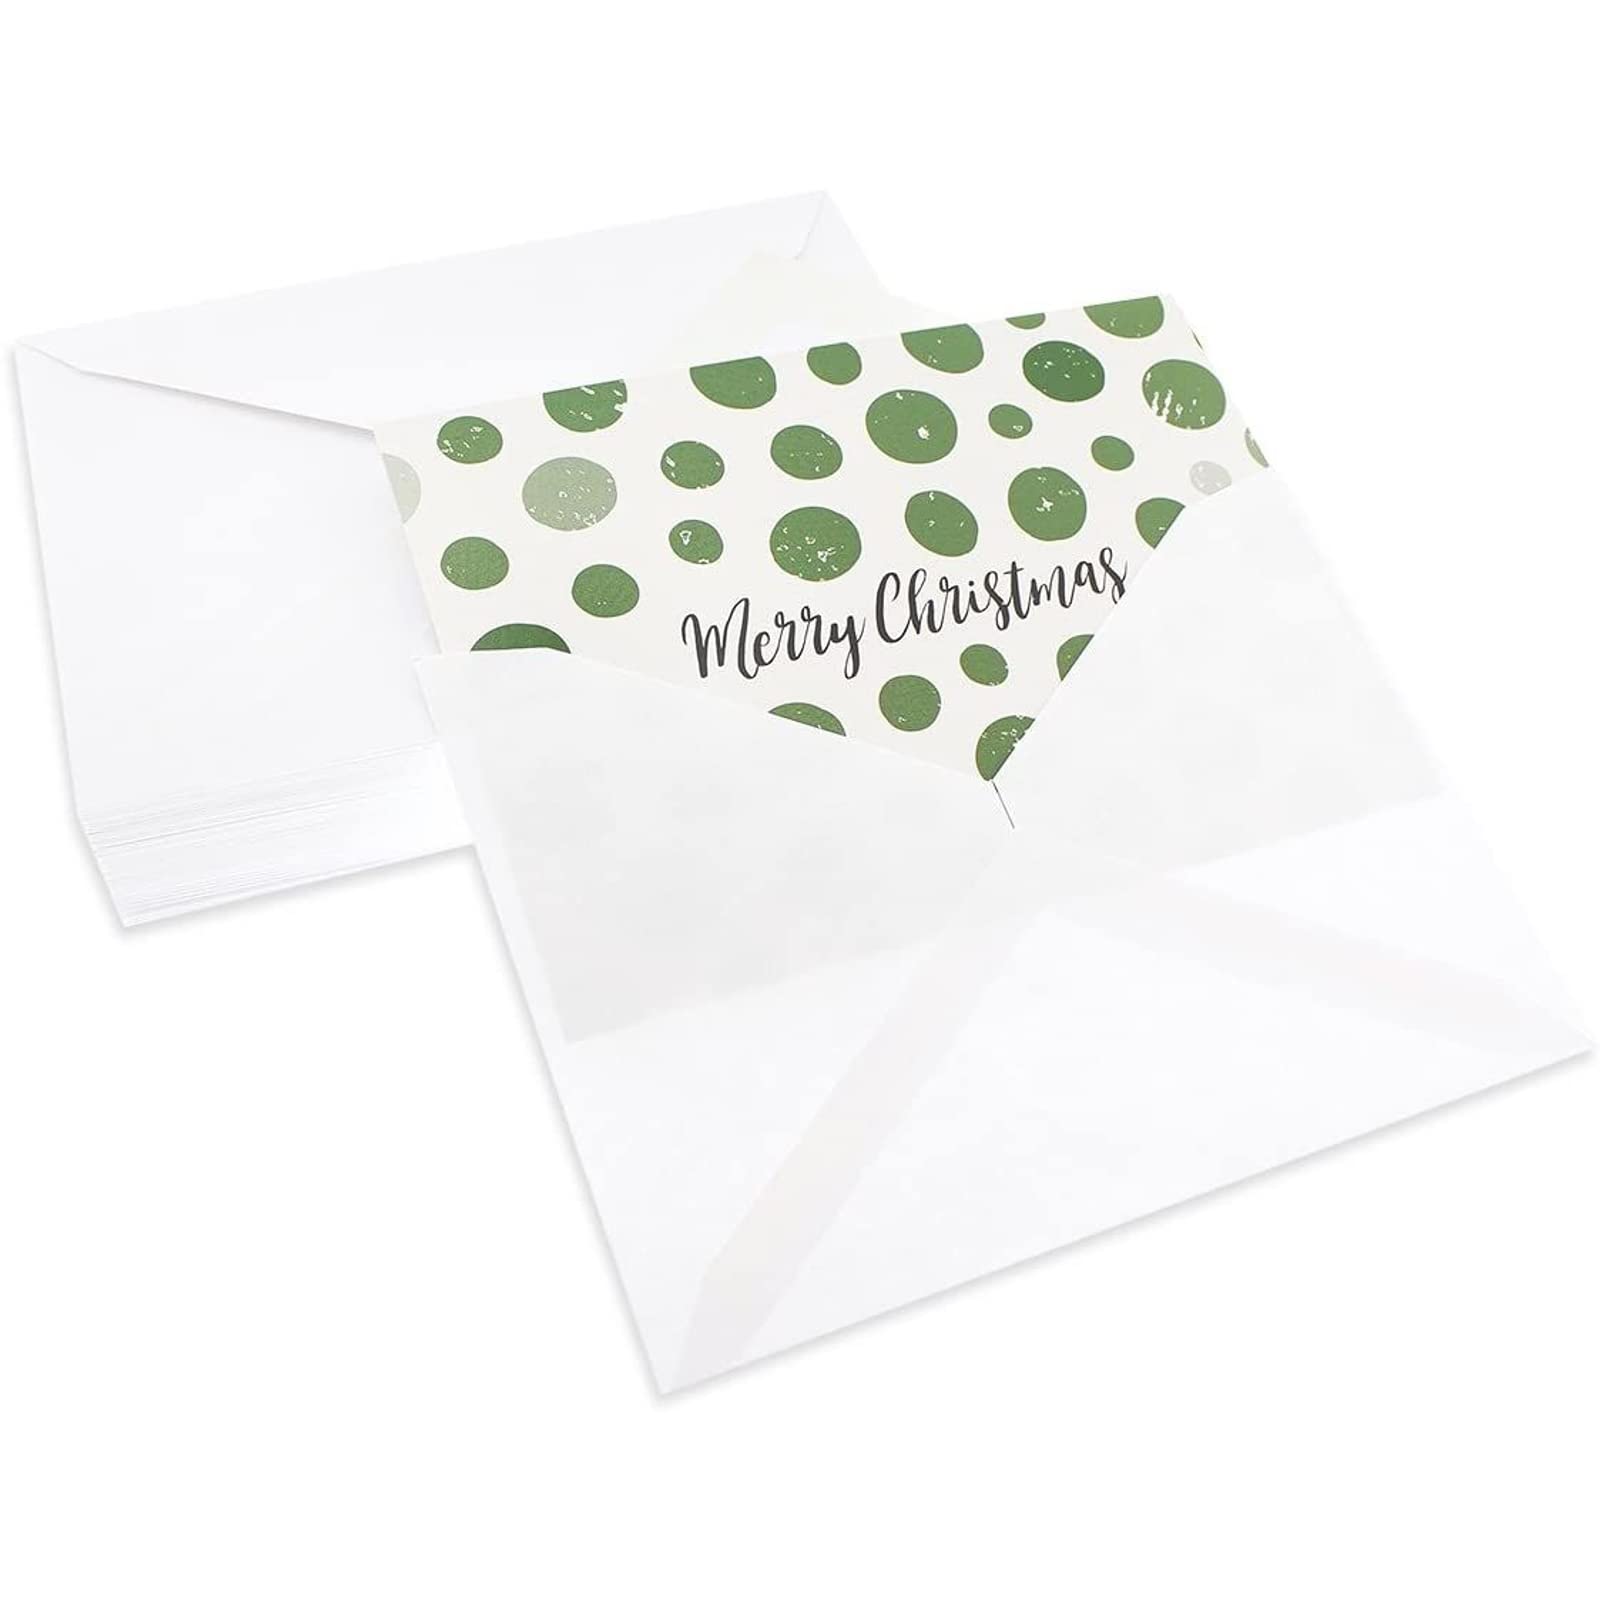 48 Pack of Christmas Winter Holiday Family Greeting Cards Green and Cream Merry Christmas Festive Designs Boxed with 48 Count White Envelopes Included 4.5 x 6.25 Inches